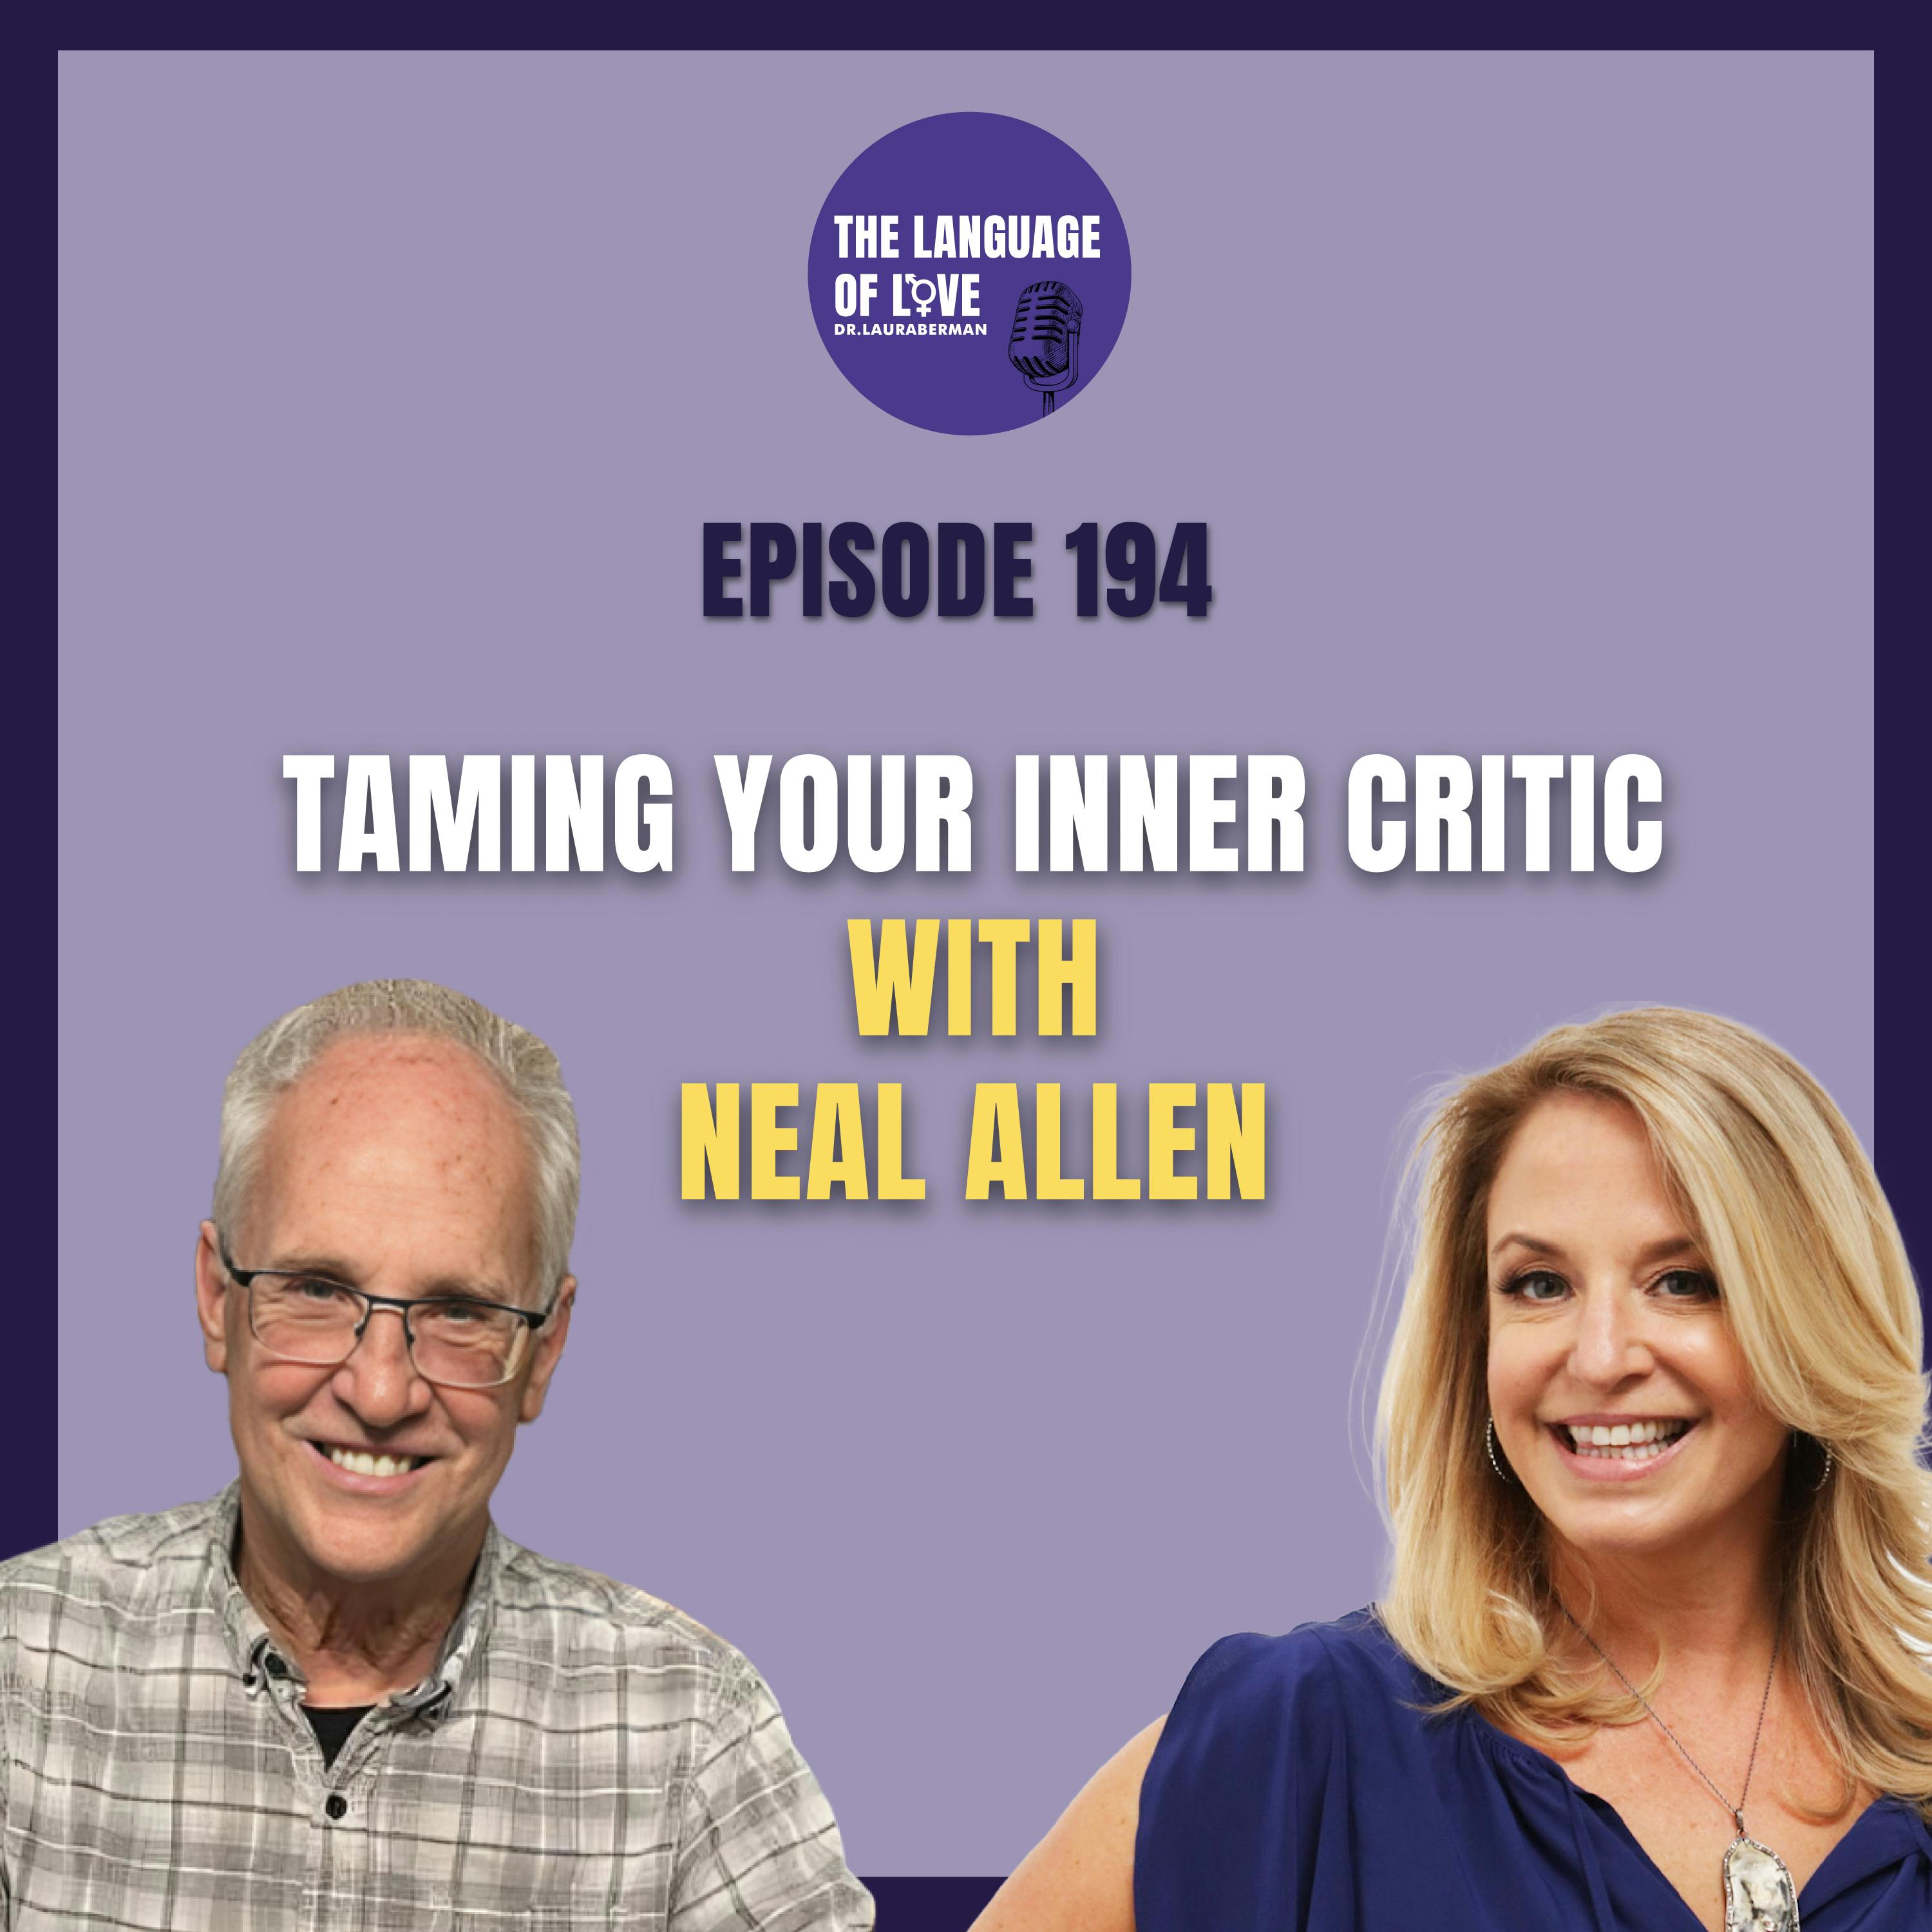 Taming Your Inner Critic with Neal Allen